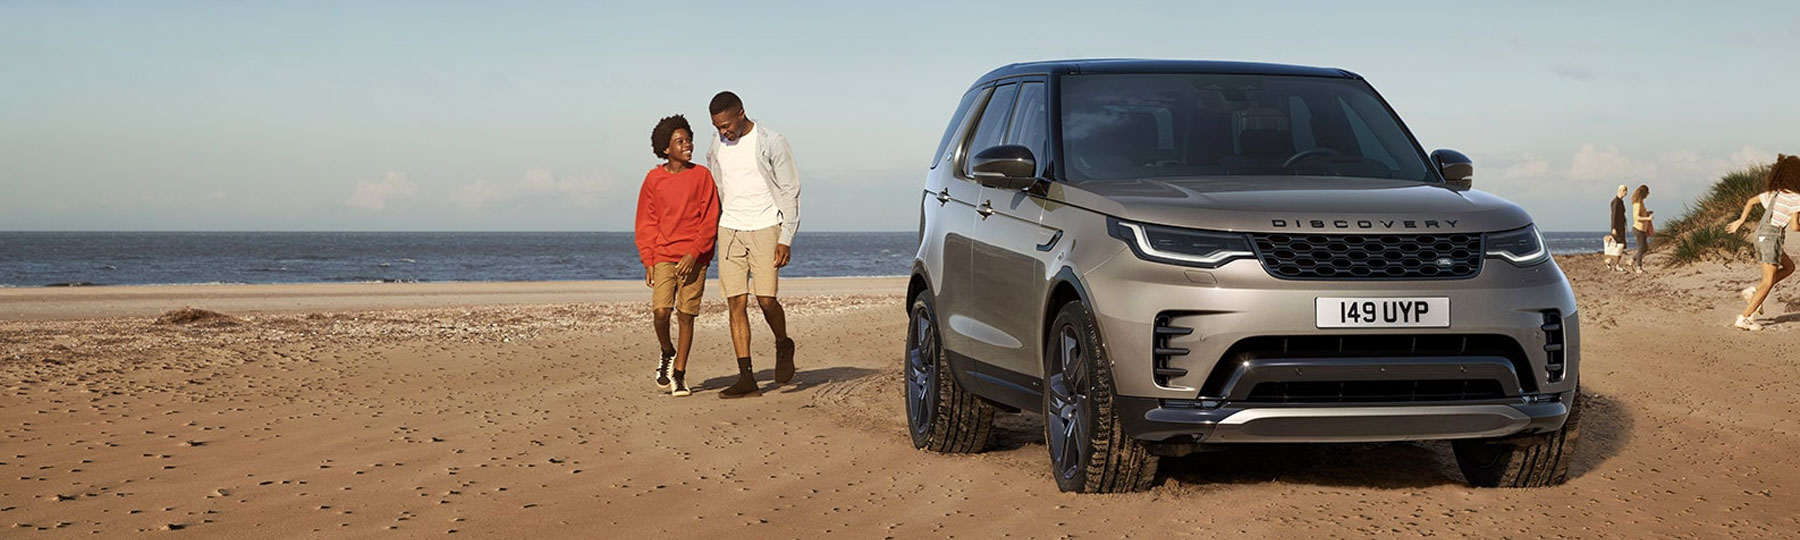 Land Rover Discovery Business Offer